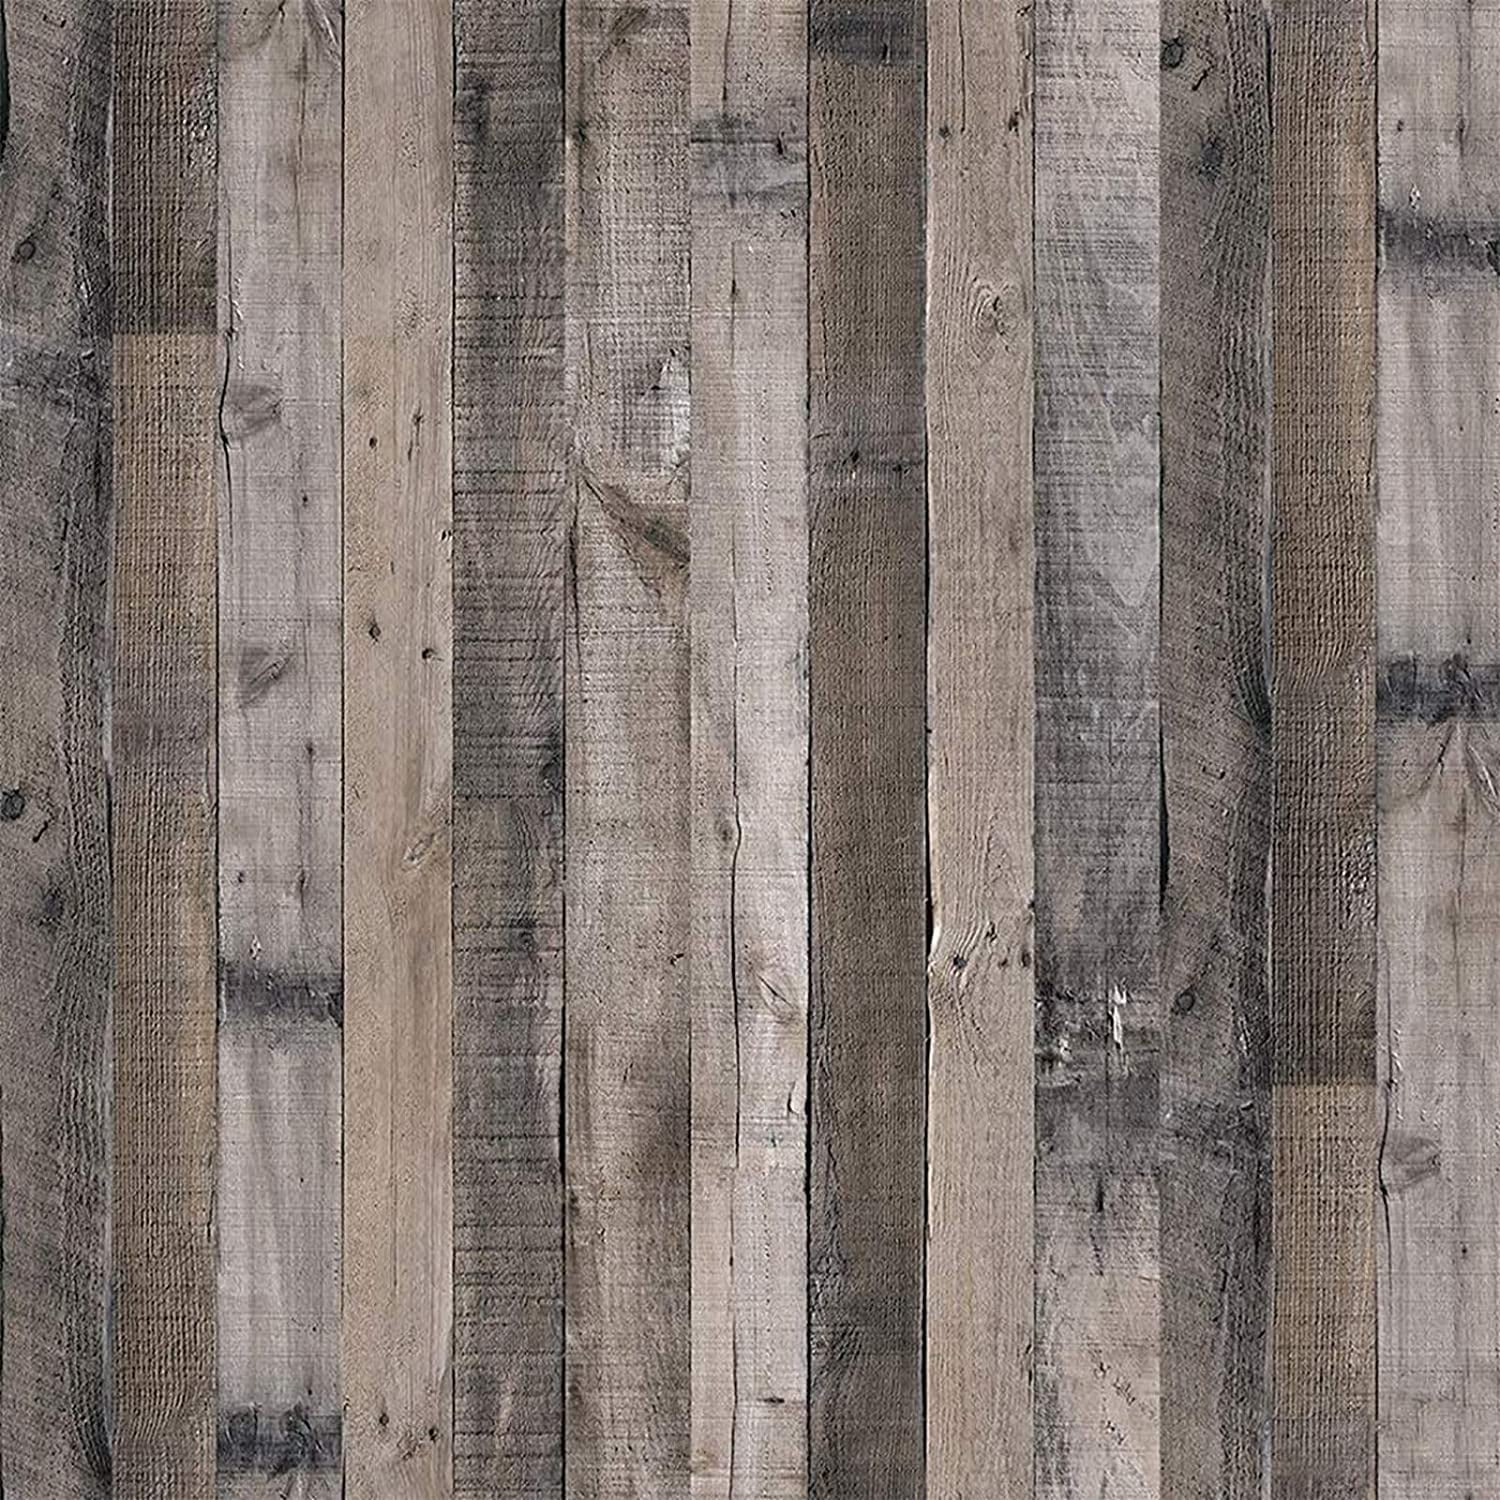 Wood Effect Wallpaper Pattern Home Decor Peel Stict Self Adhesive Wall Covering 